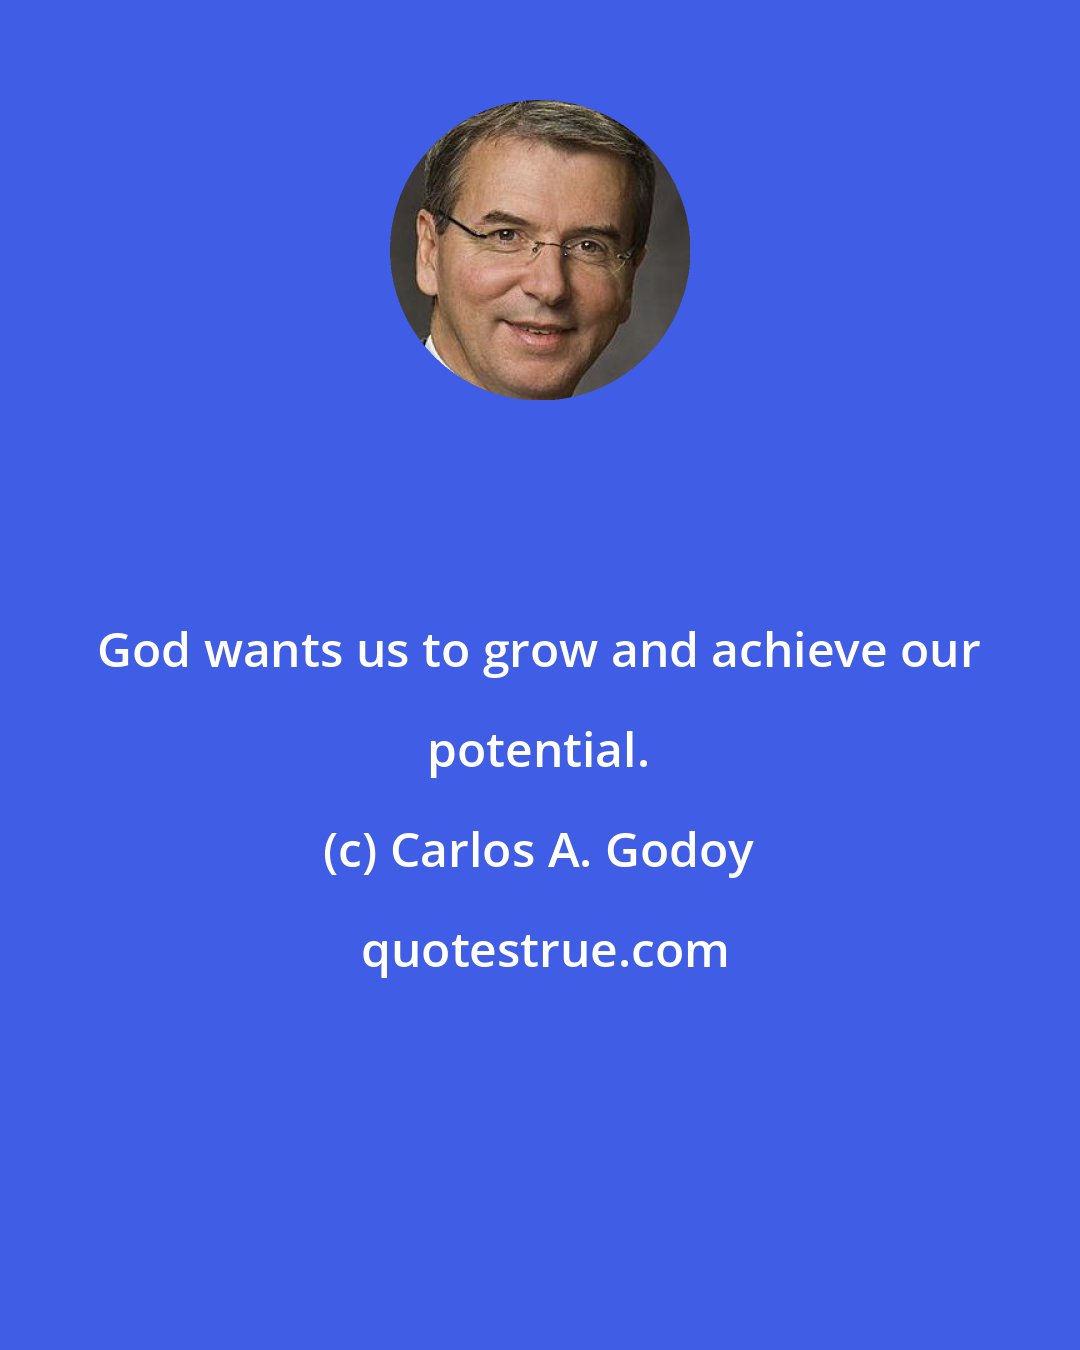 Carlos A. Godoy: God wants us to grow and achieve our potential.